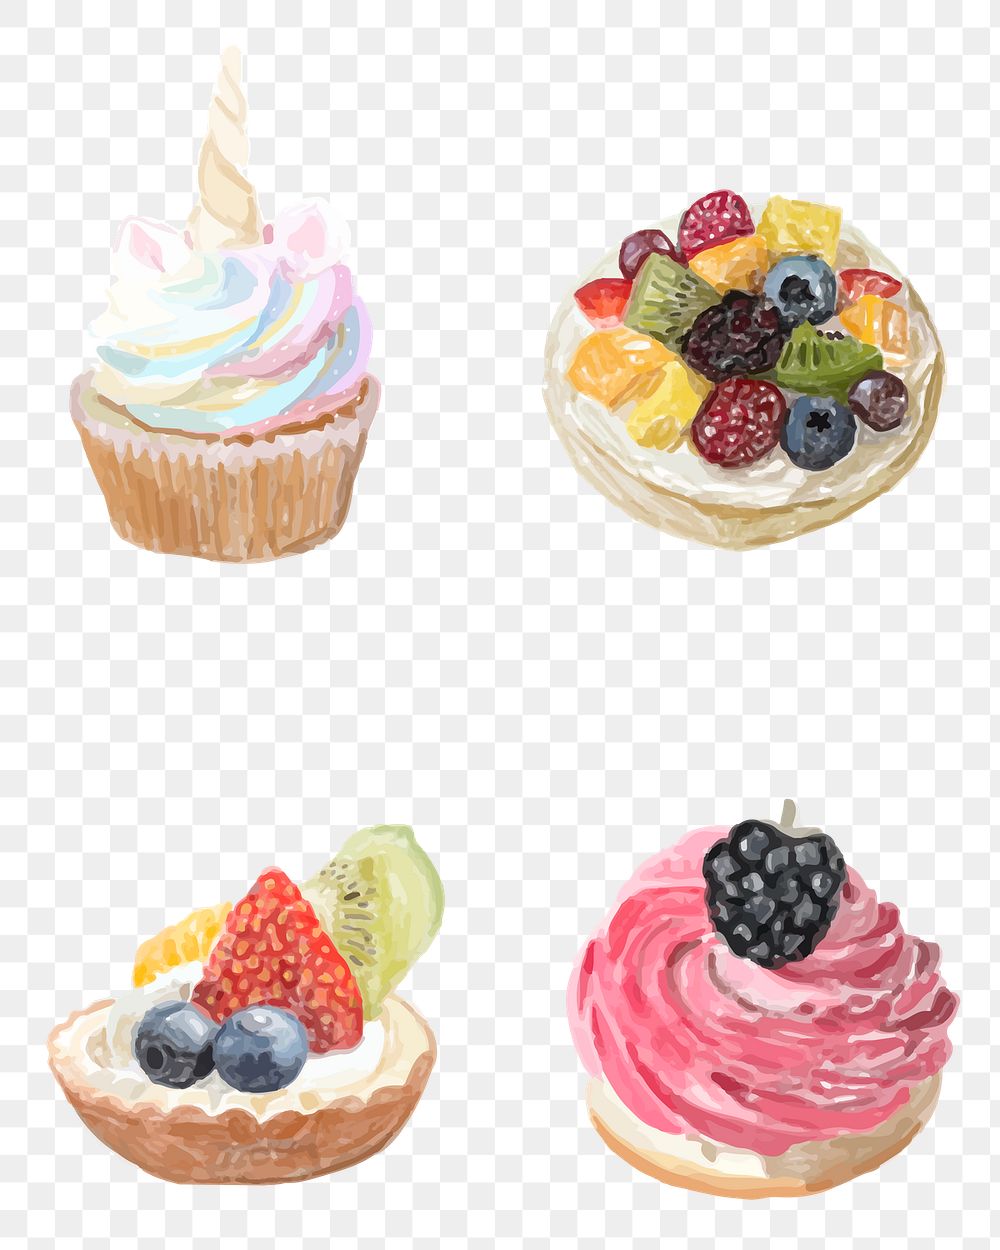 Freshly baked pastries png sticker hand drawn collection